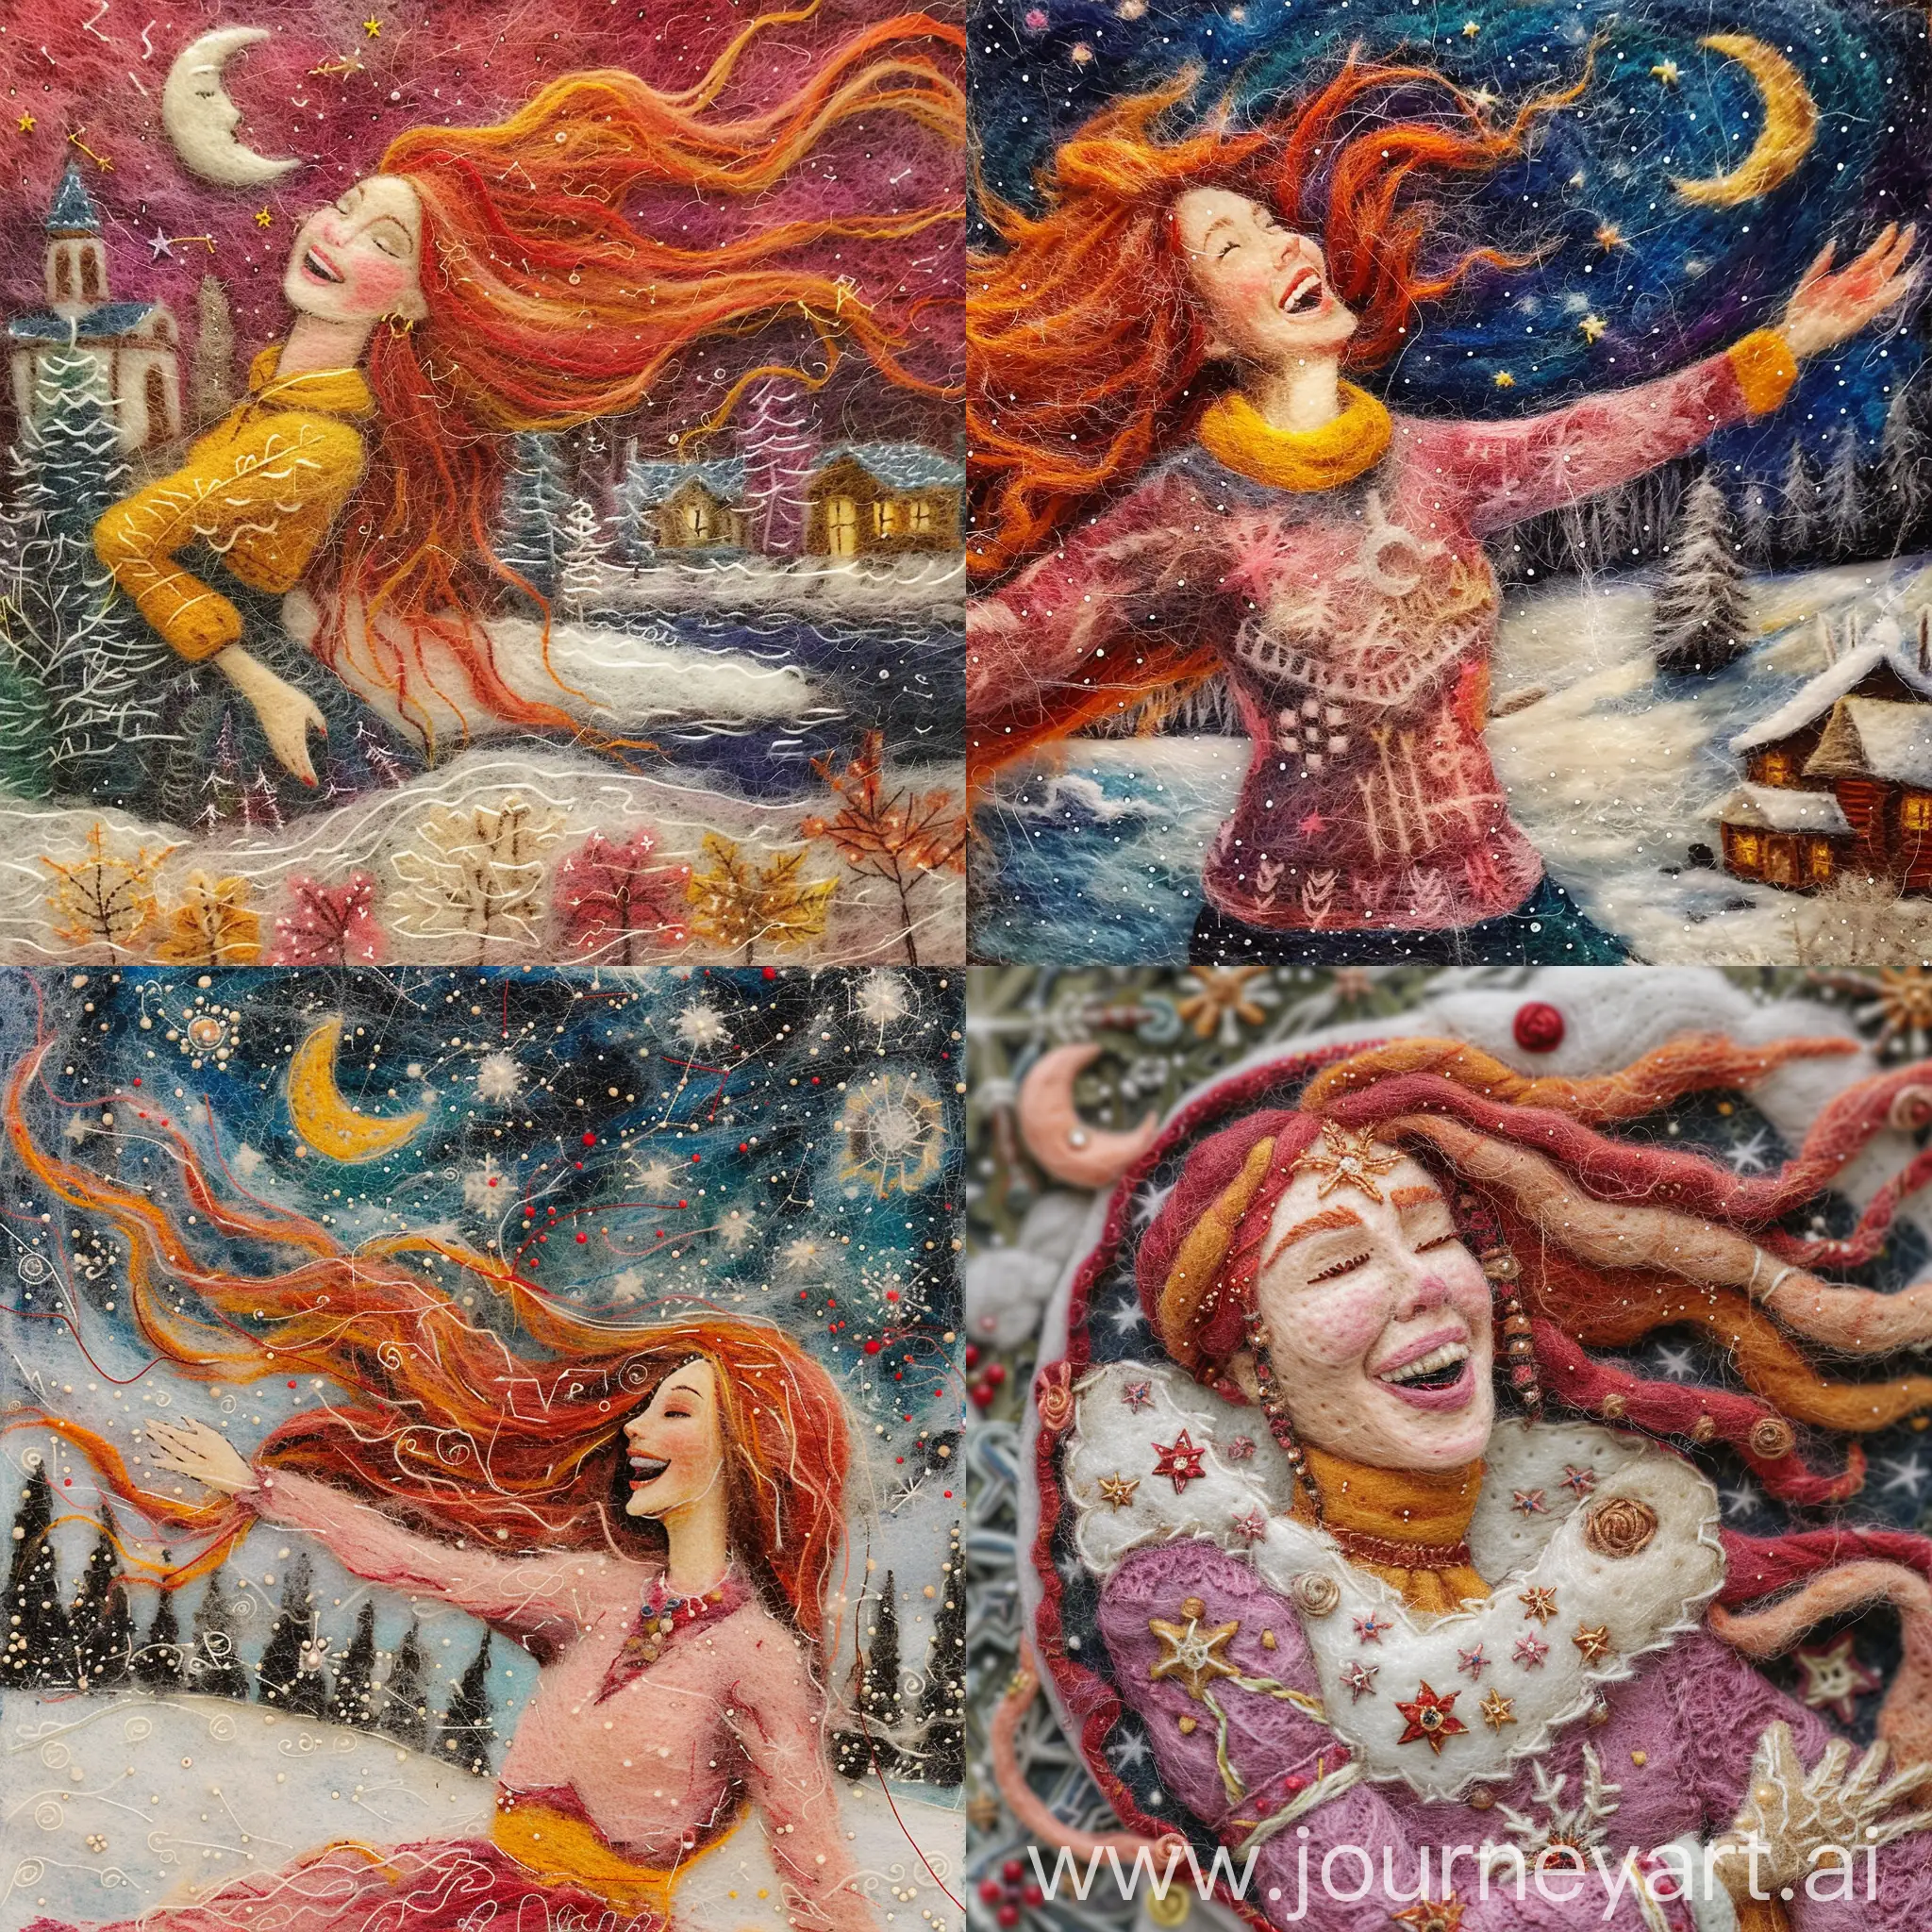 a acrylic needle felted picture of a beautiful happy woman with long red hair celebrating winter solstice in the cold ice, astrology aesthetics, moon and stars, in winter in Siberia village, slavic folklore, felted wool, colors pink mustard yellow red, winter